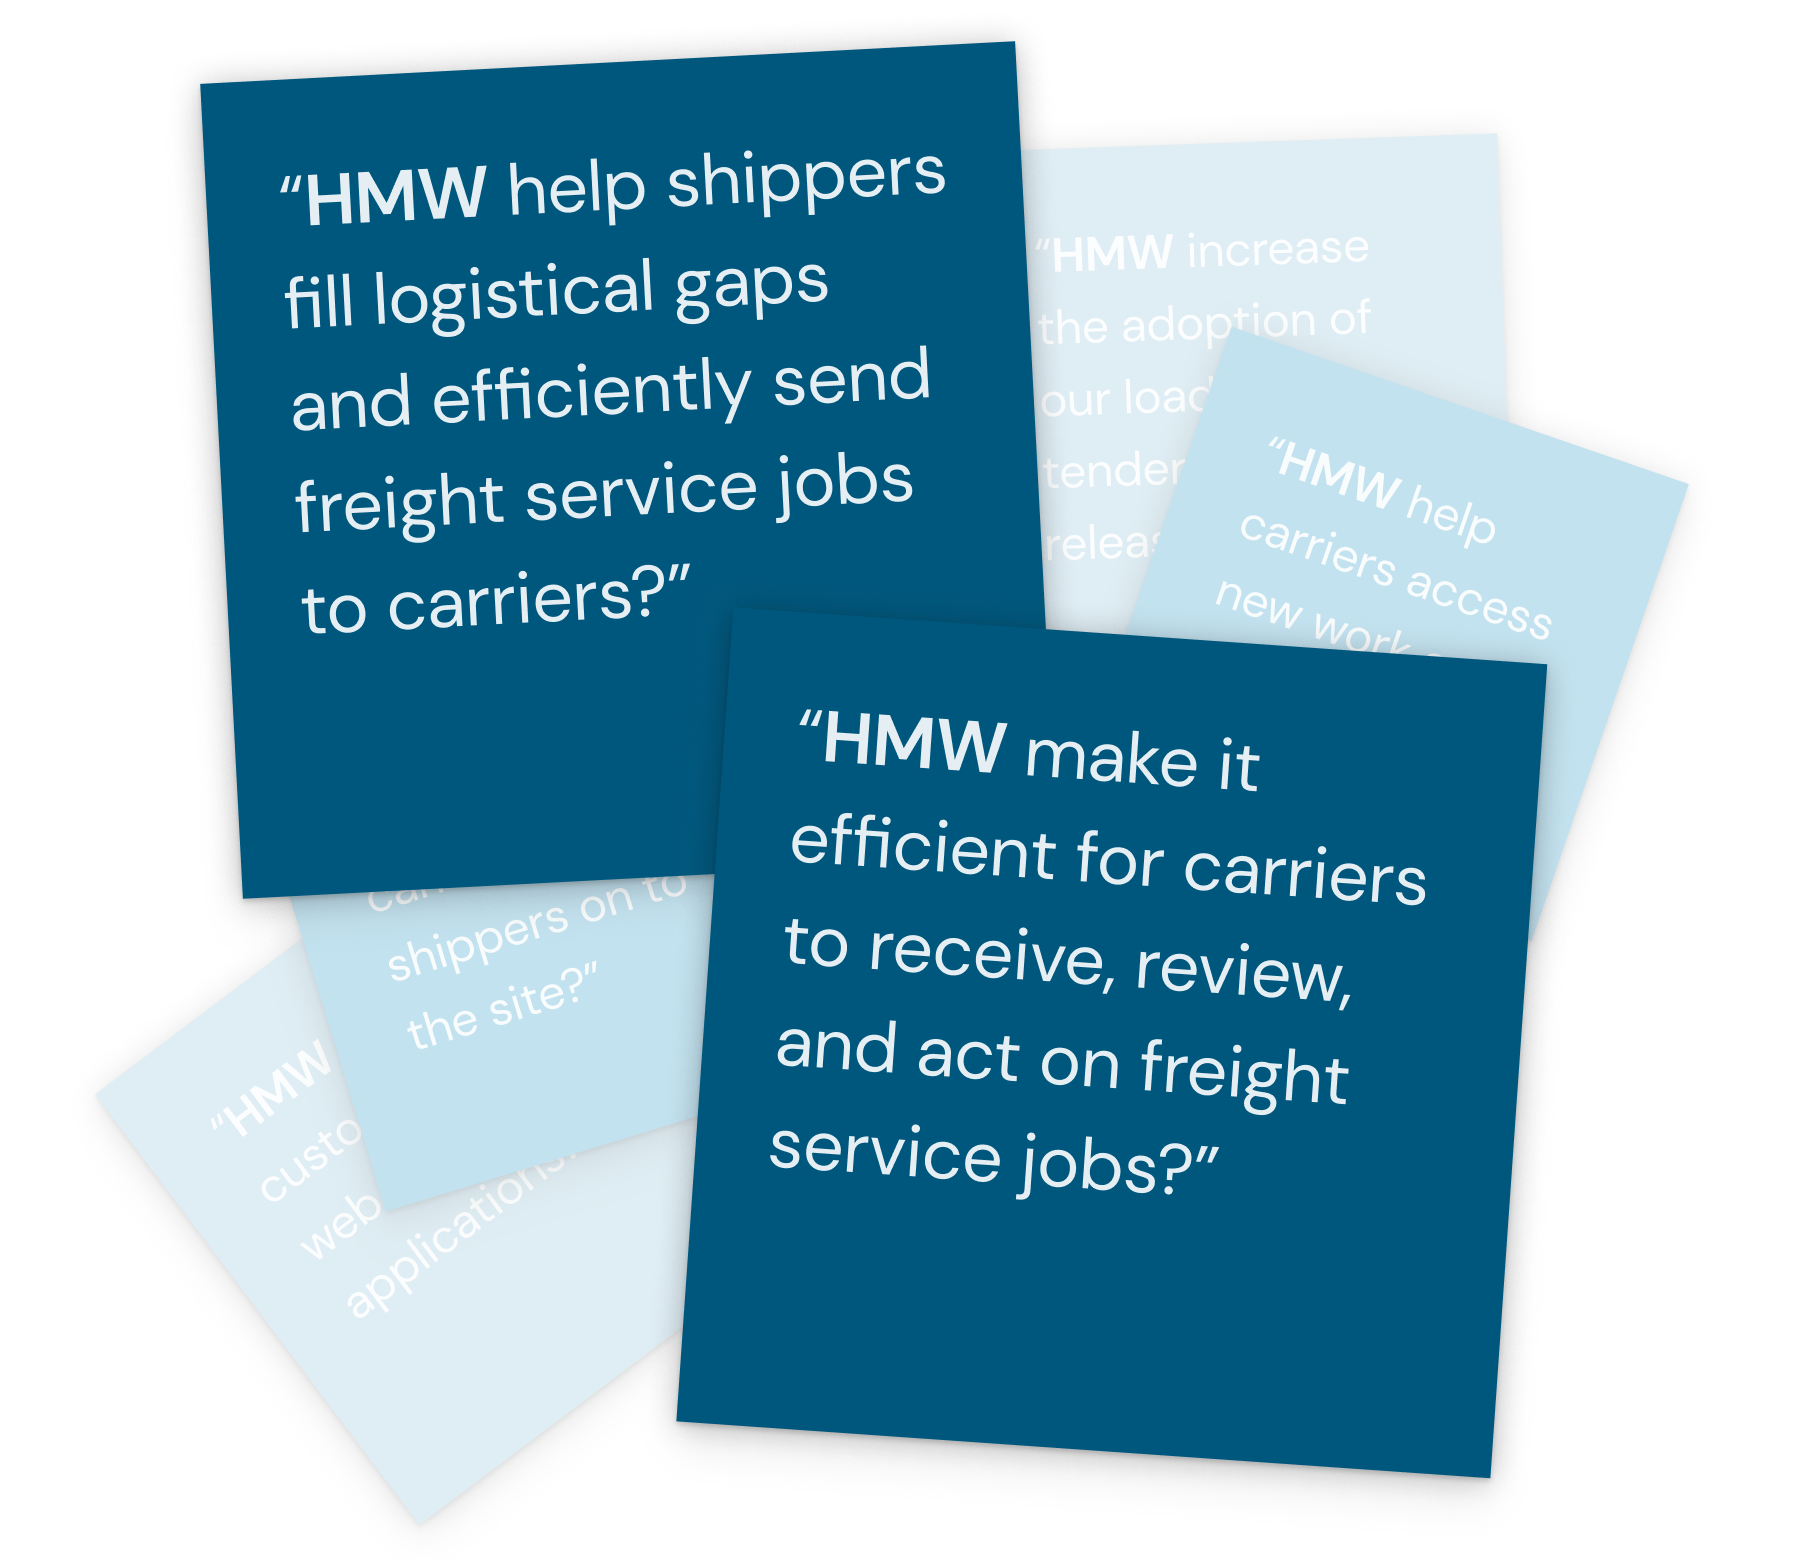 HMW help shippers fill logistical gaps and efficiently send freight service jobs to carriers? and HMW make it efficient for carriers to receive, review, and act on freight service jobs?